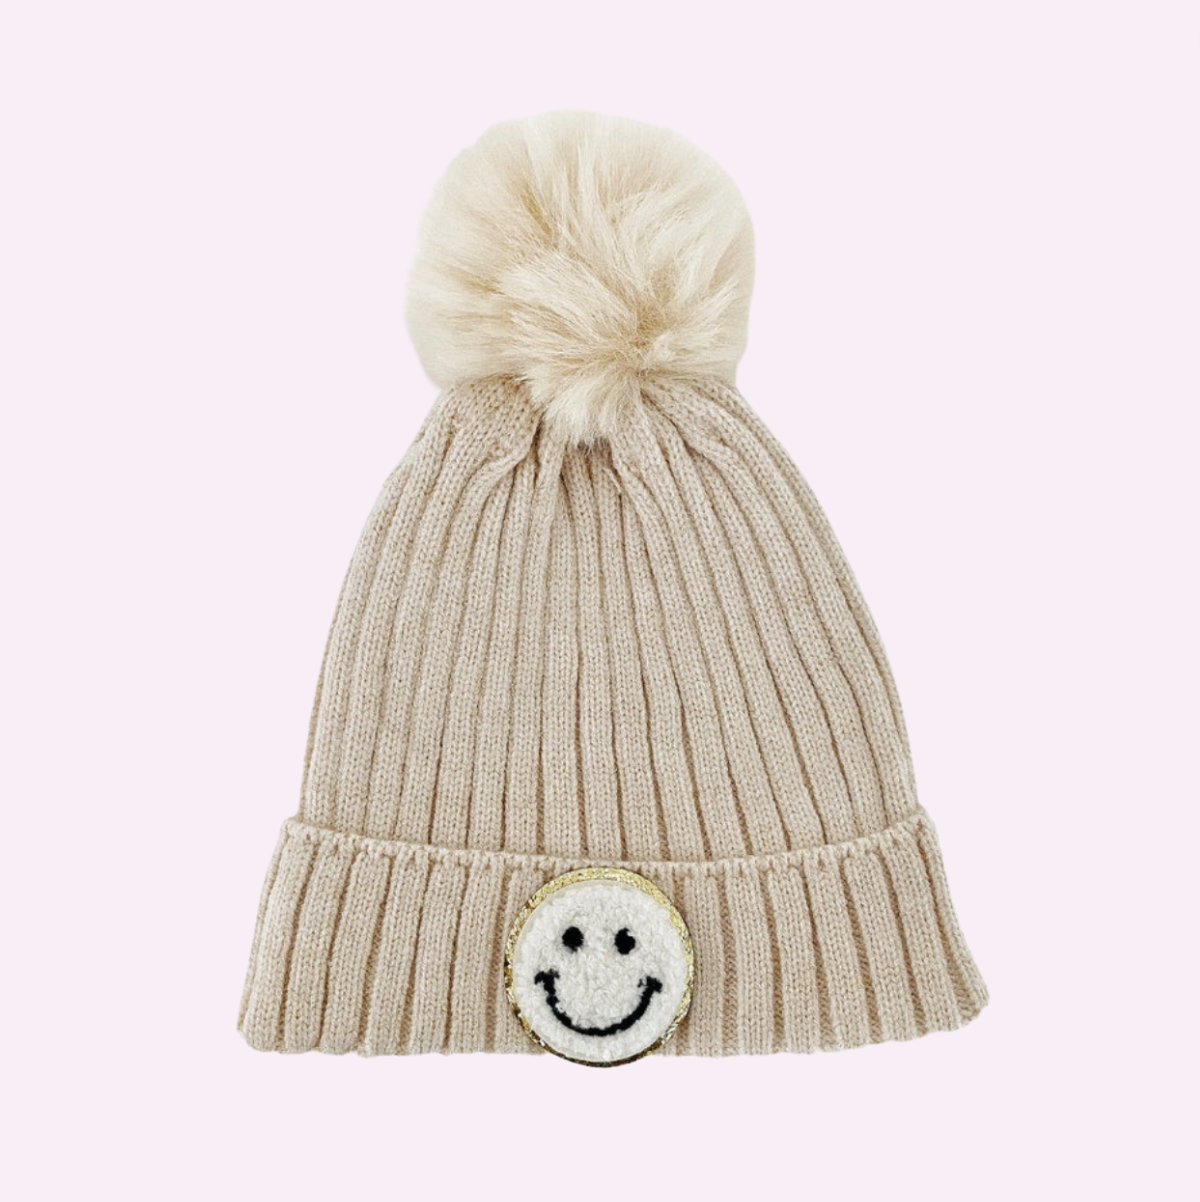 TODDLER SMILE POM BEANIE ♡ ribbed beanie with smile patch